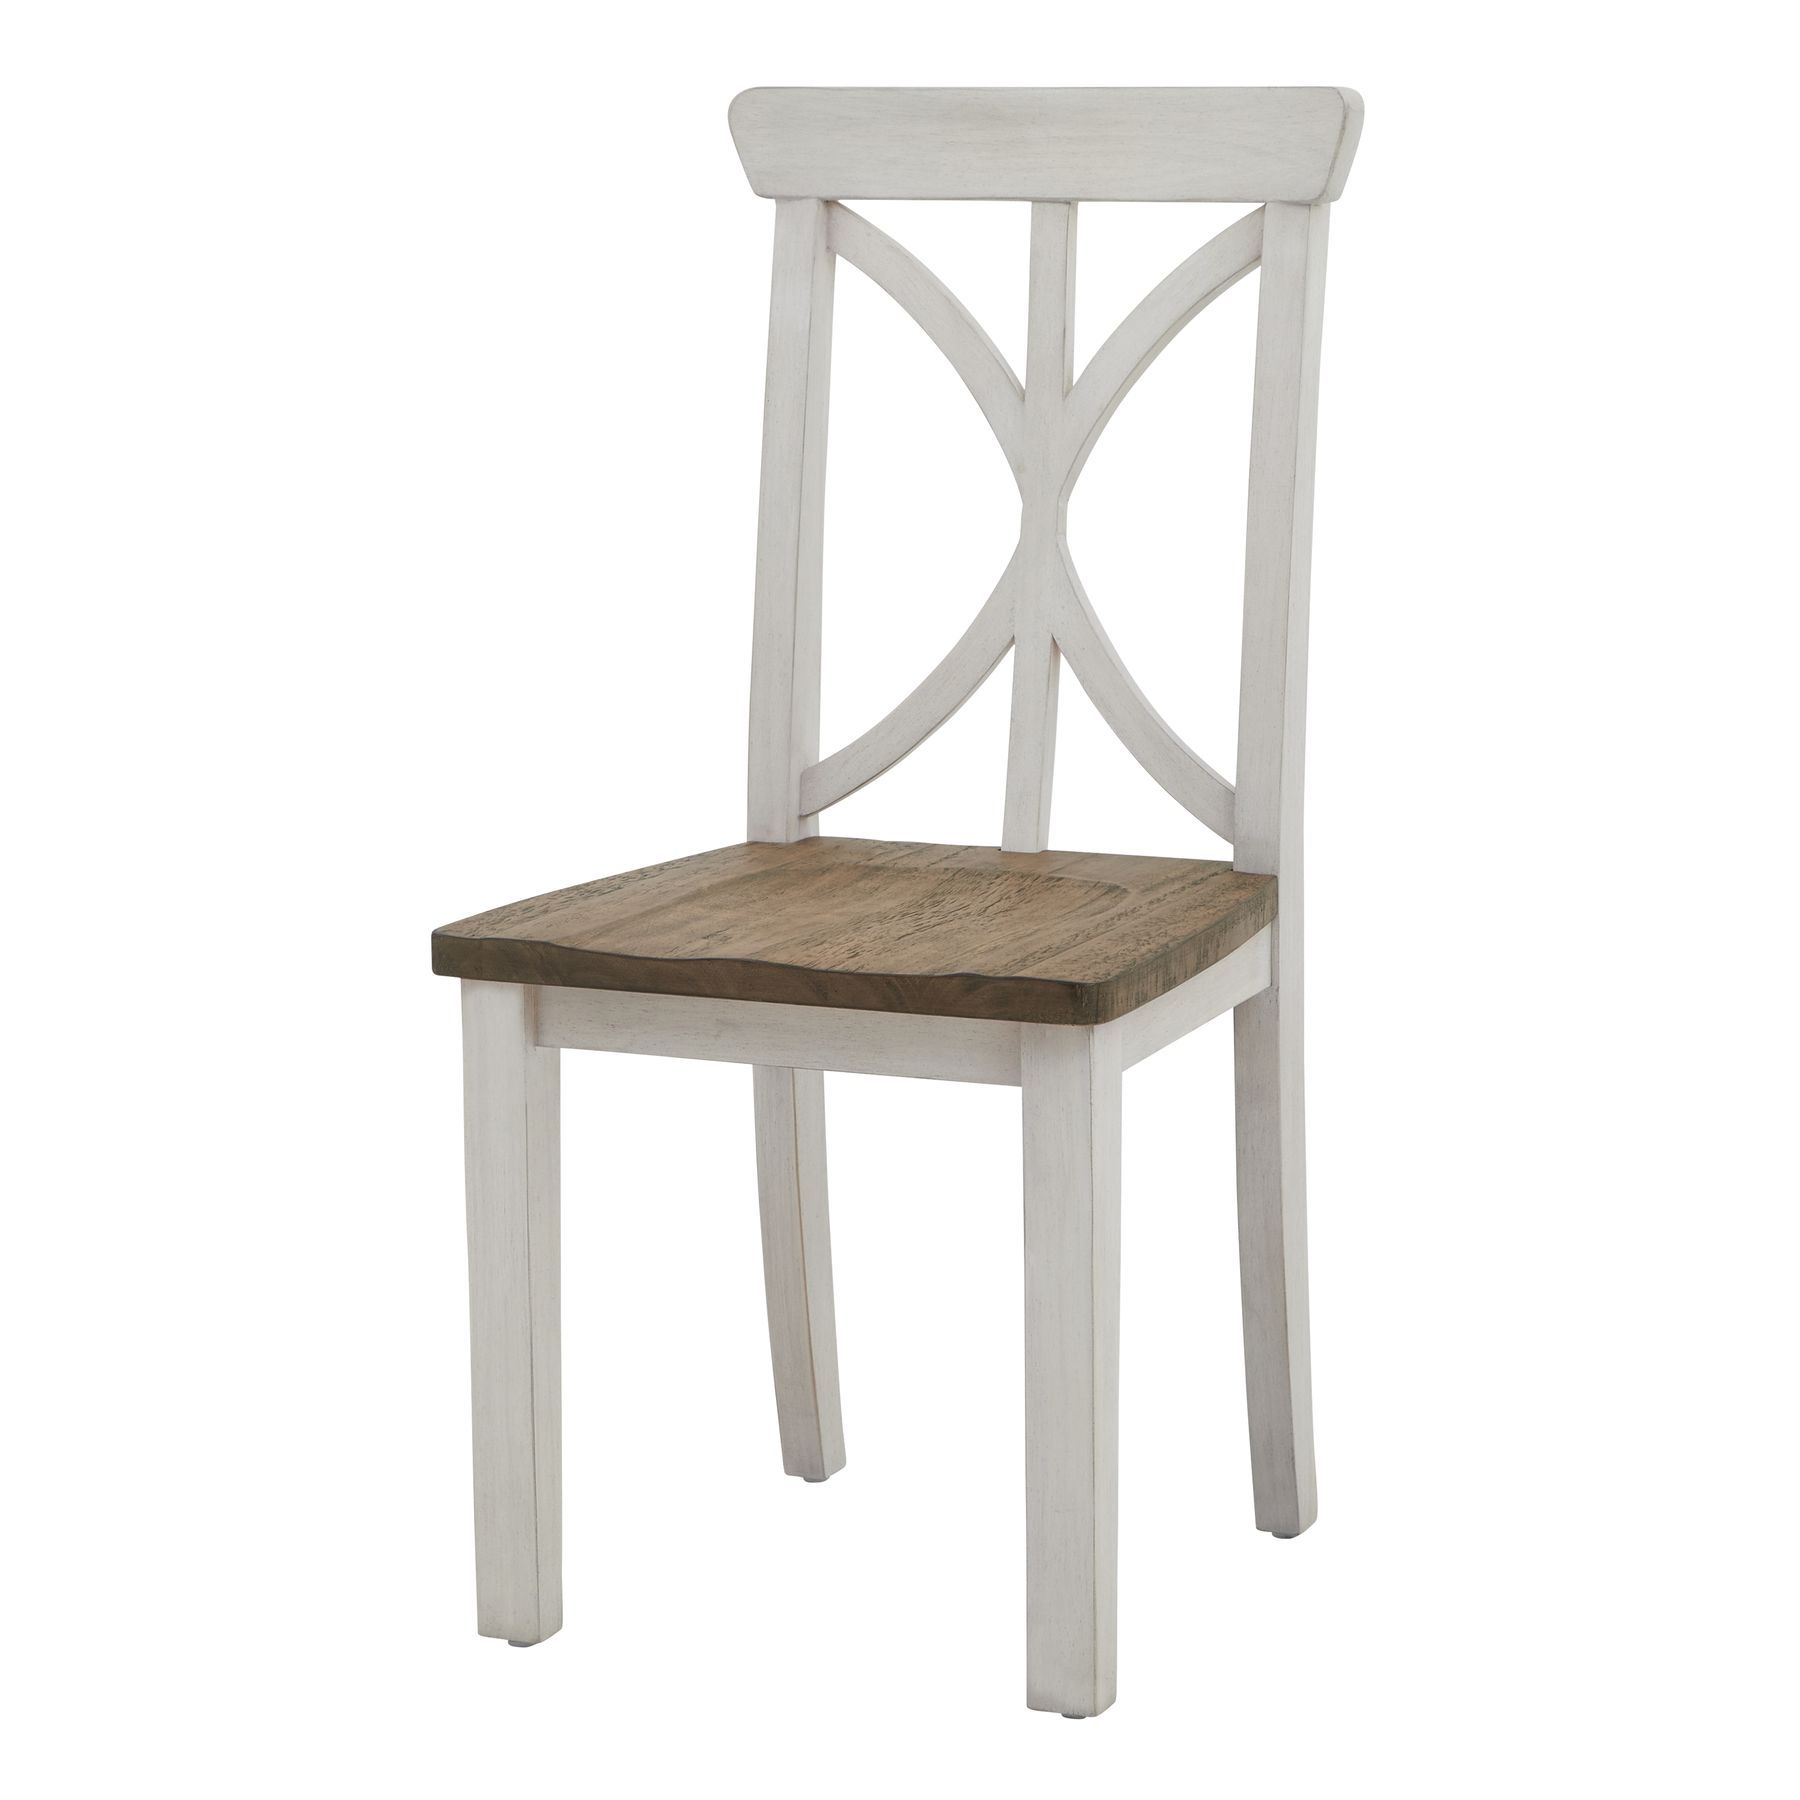 Luna Collection Dining Chair - Image 1